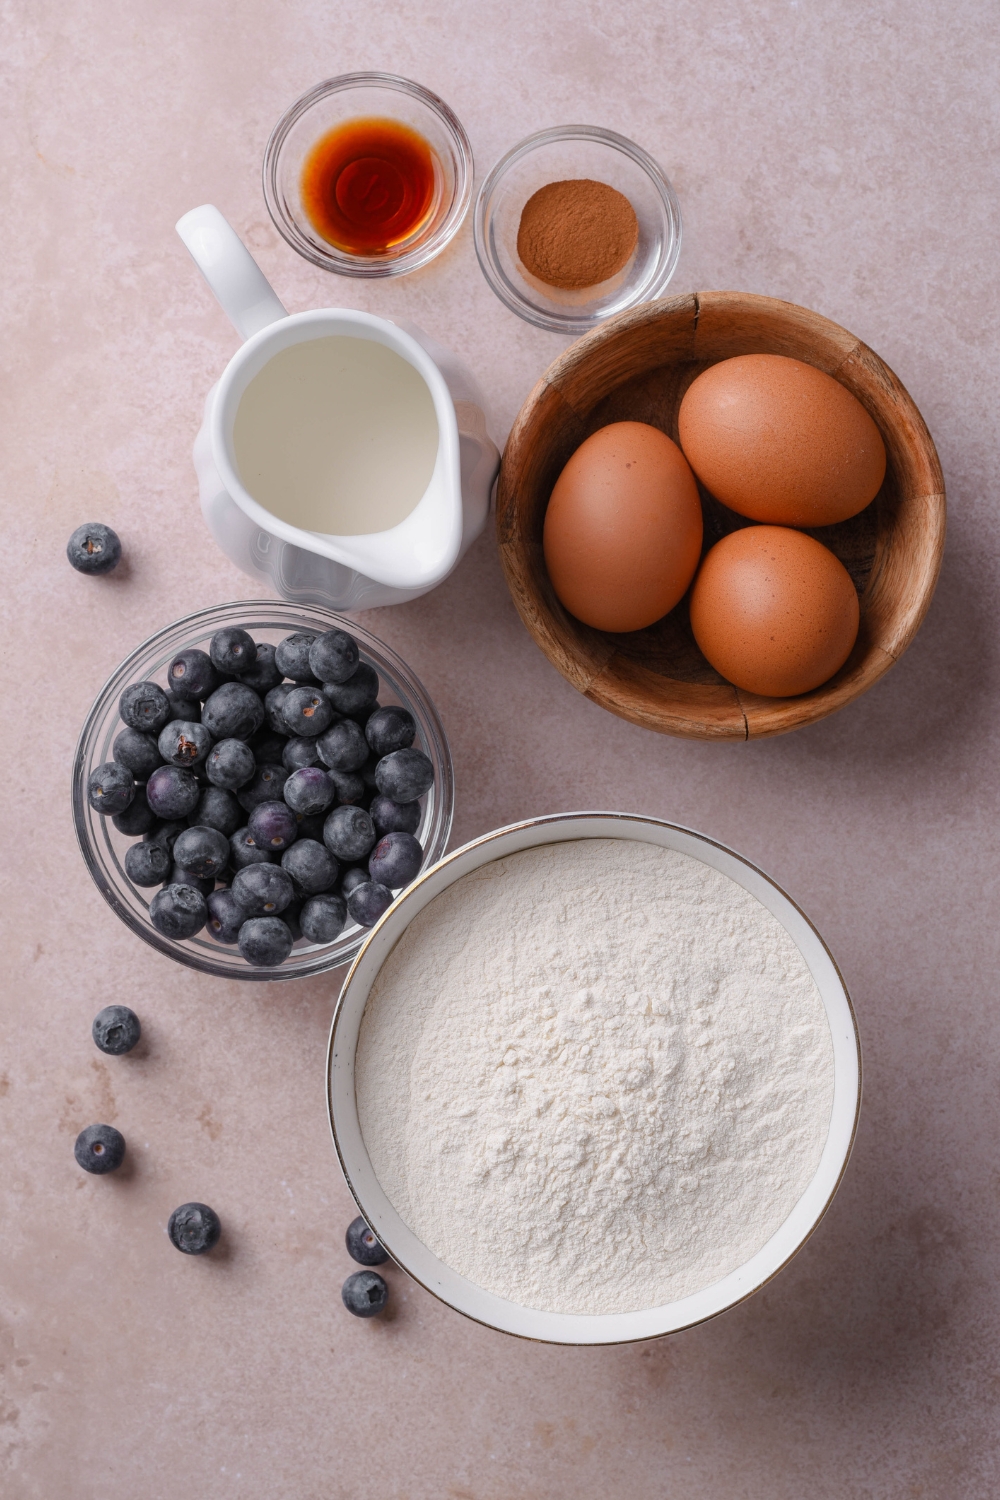 A countertop with eggs, vanilla, cinnamon, milk, blueberries, and pancake mix in separate bowls.